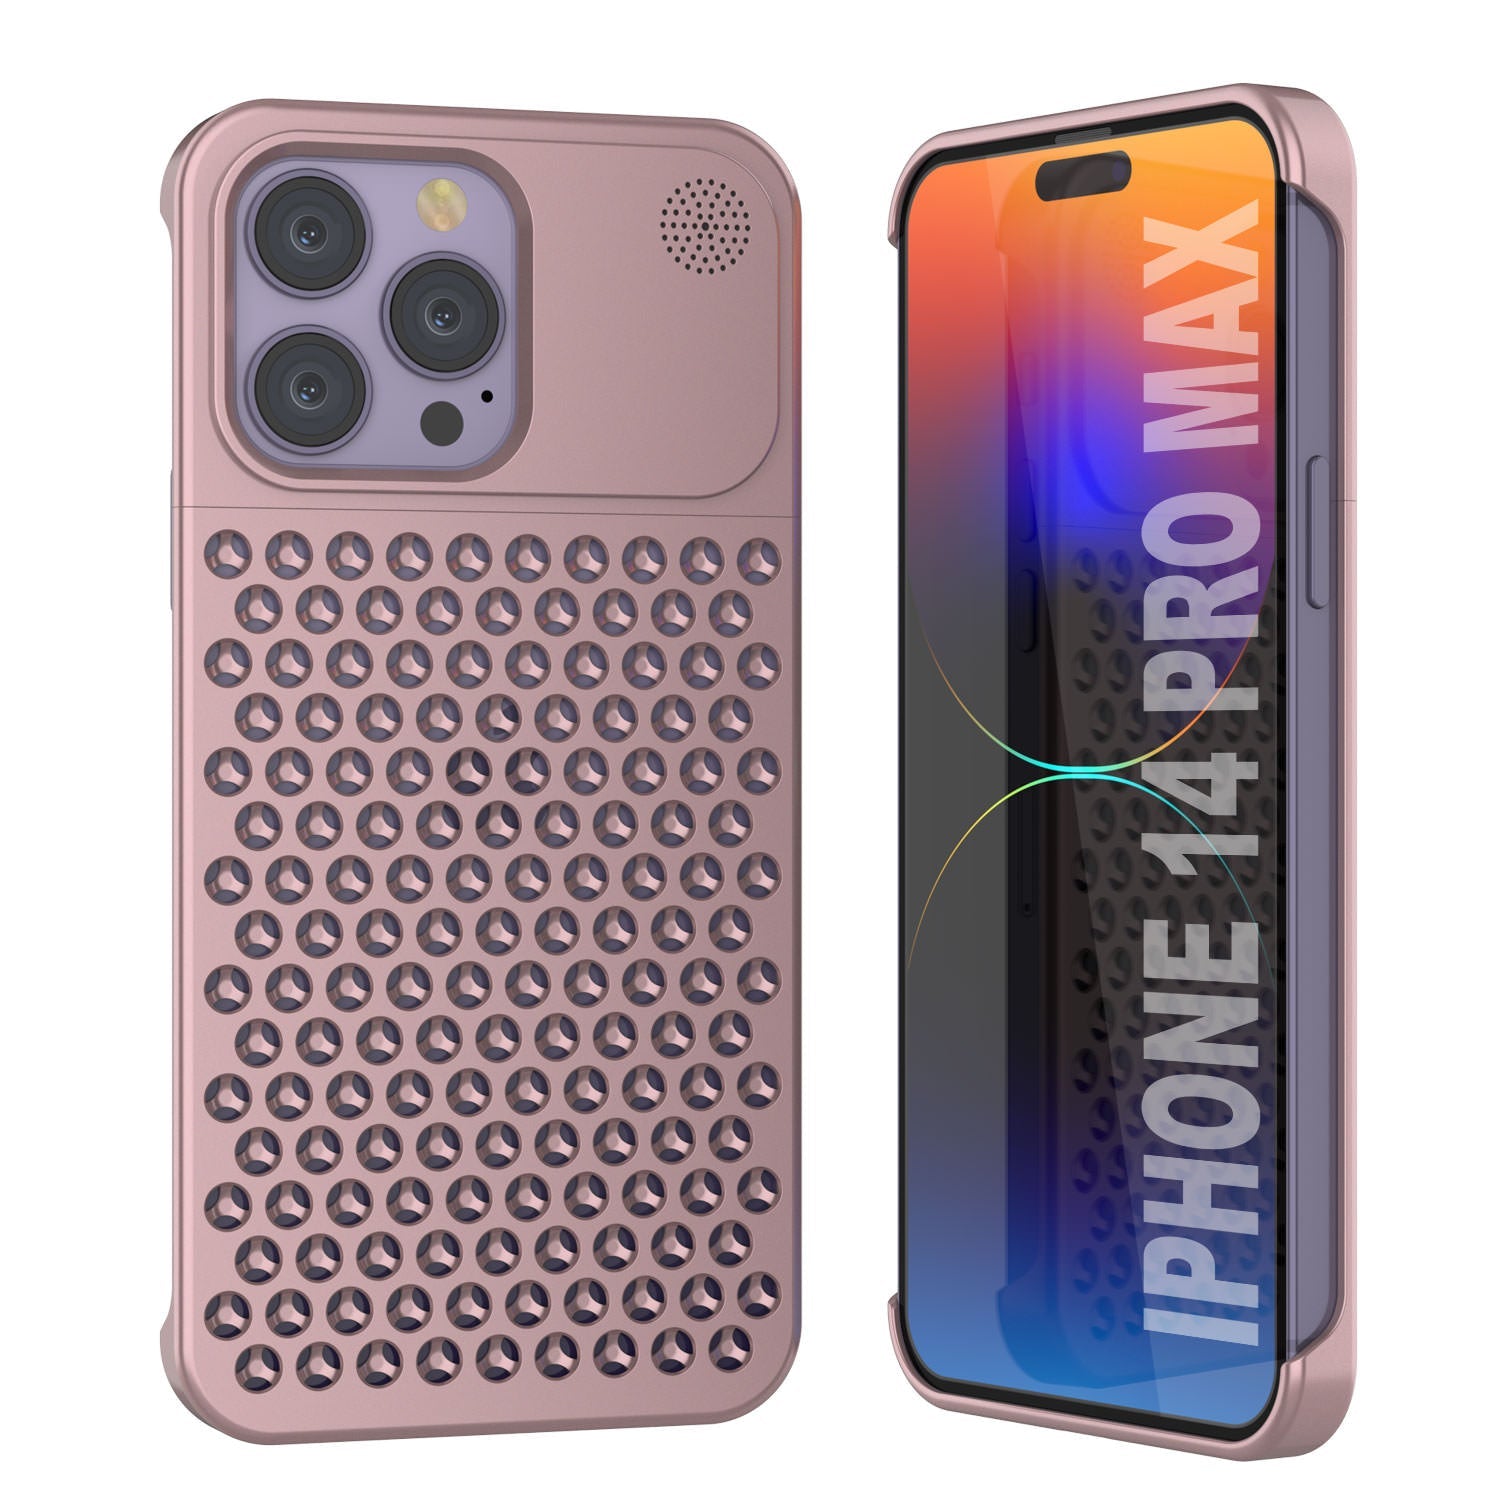 PunkCase for iPhone 14 Pro Max Aluminum Alloy Case [Fortifier Extreme Series] Ultra Durable Cover [Rose-Gold]